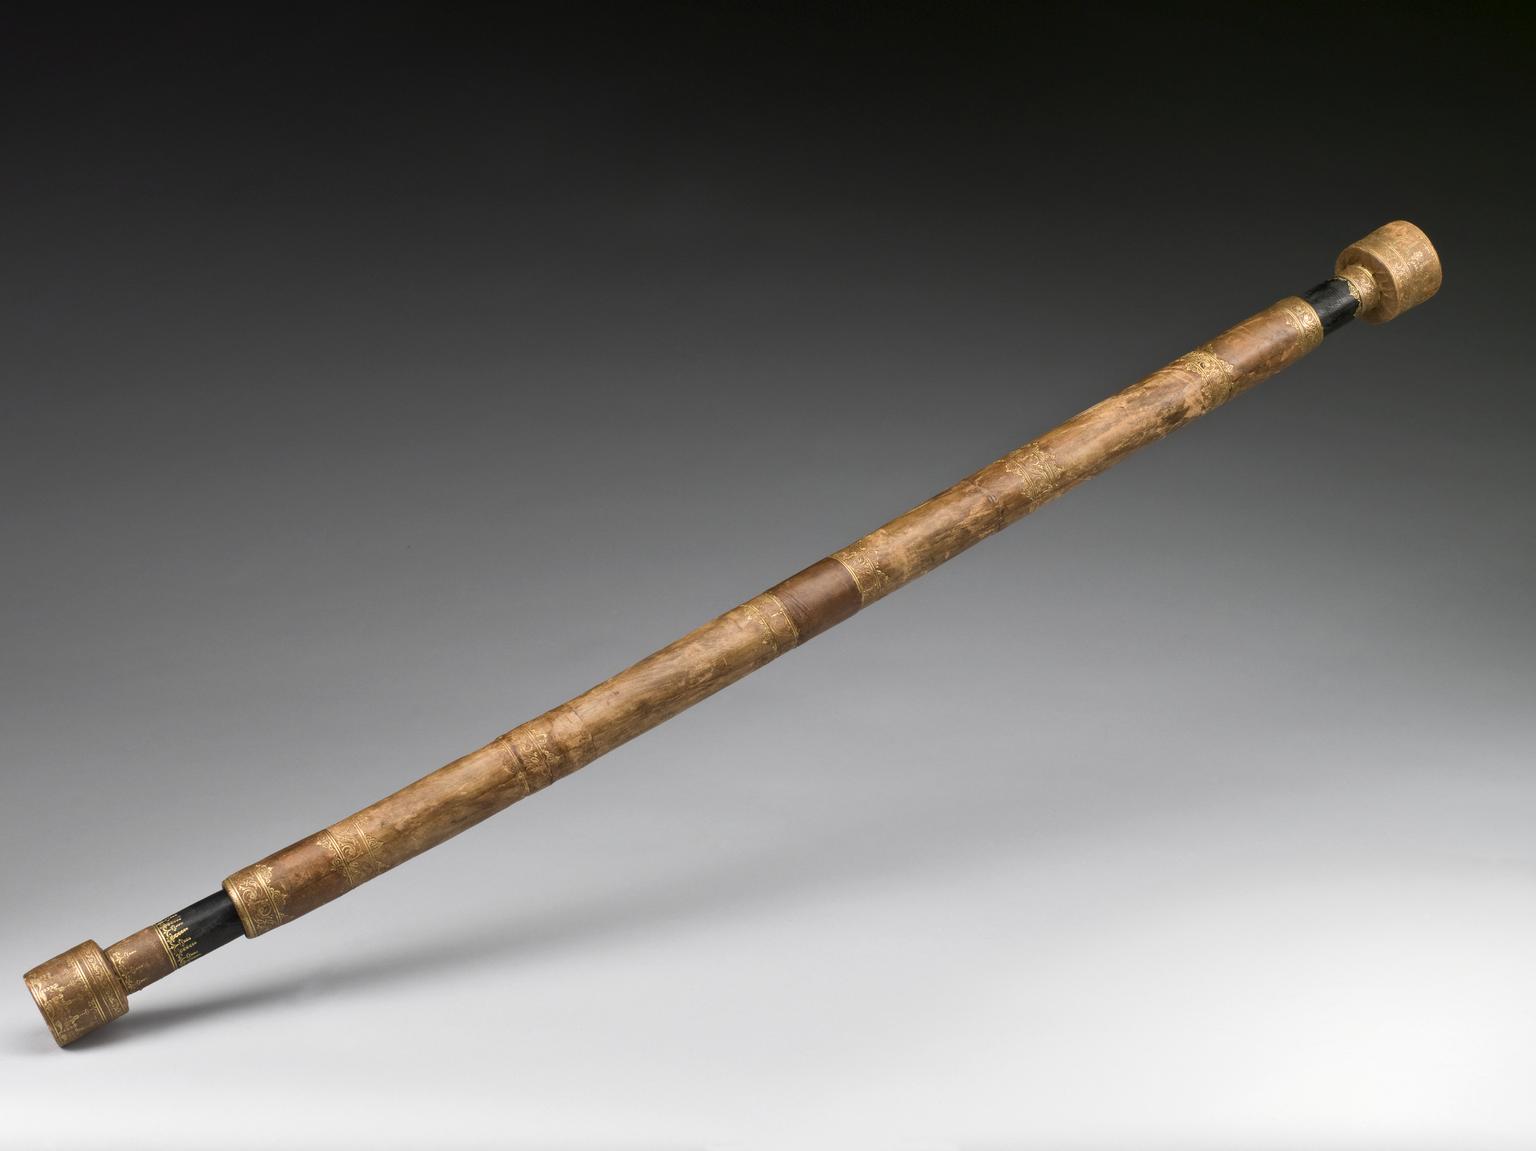 Galilean telescope A replica of an early 17th century Galilean telescope. It appears as a thin brown rod approximately 2 feet, 8 inches long.